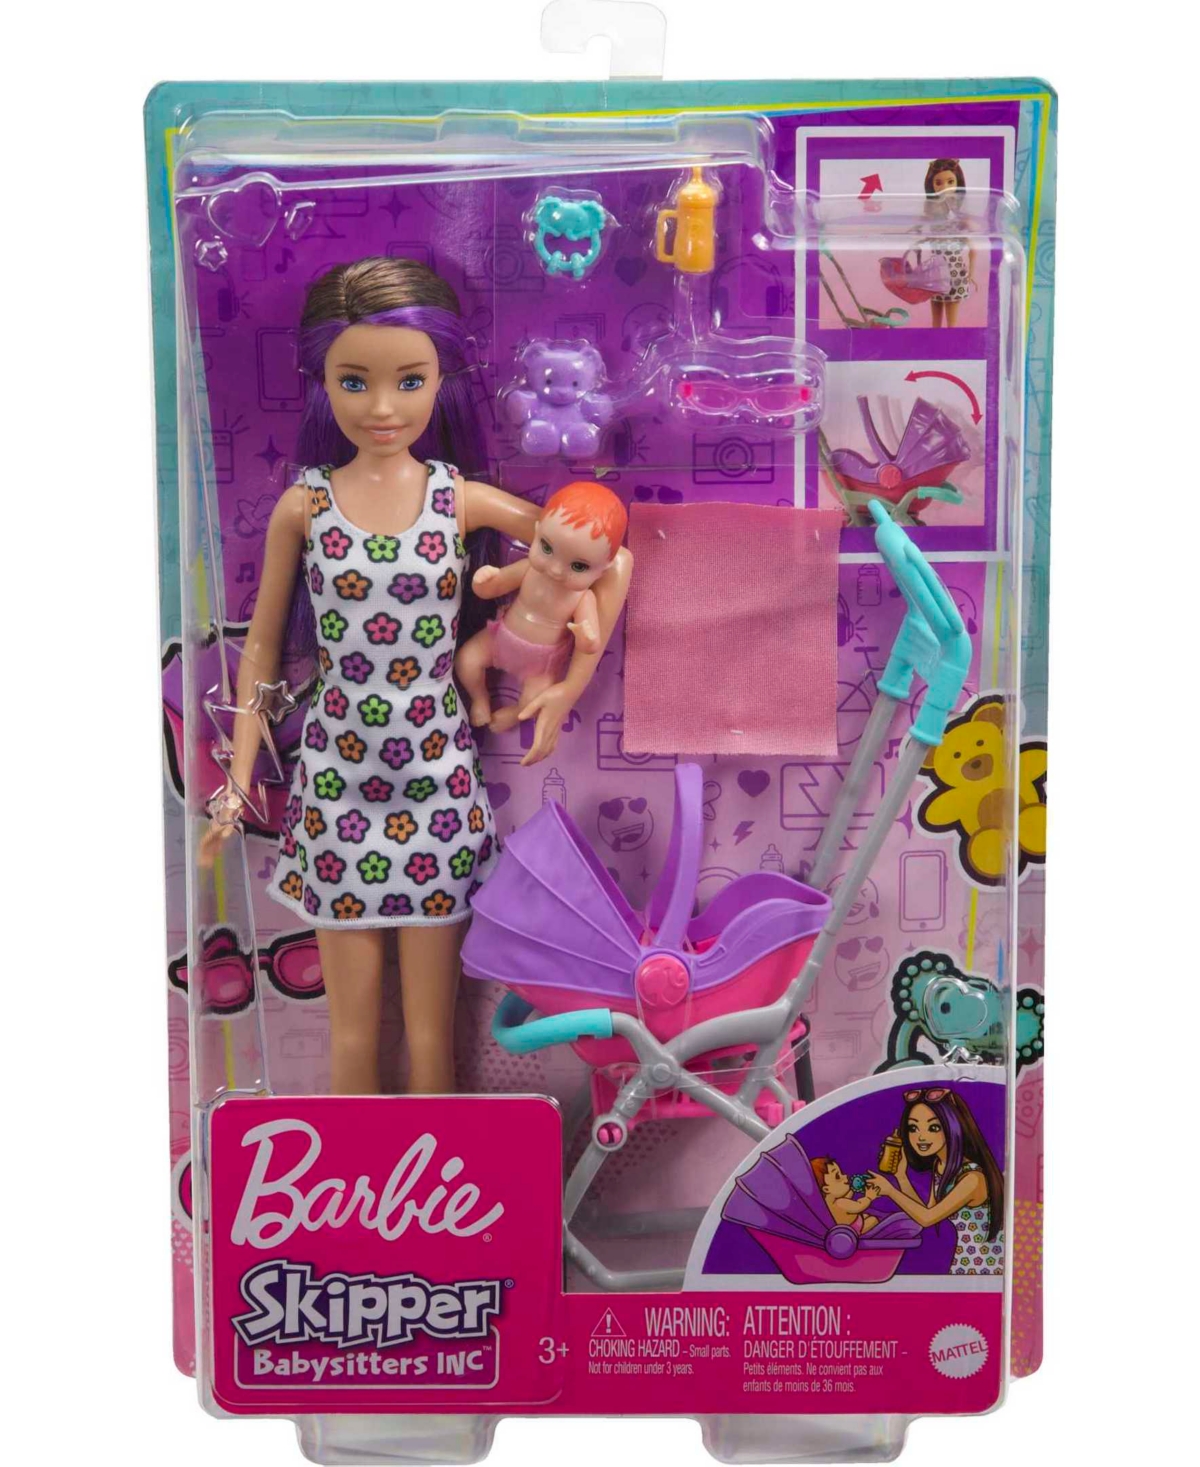 Barbie Kids' Skipper Babysitters, Inc. Doll And Stroller Playset In Multi-color